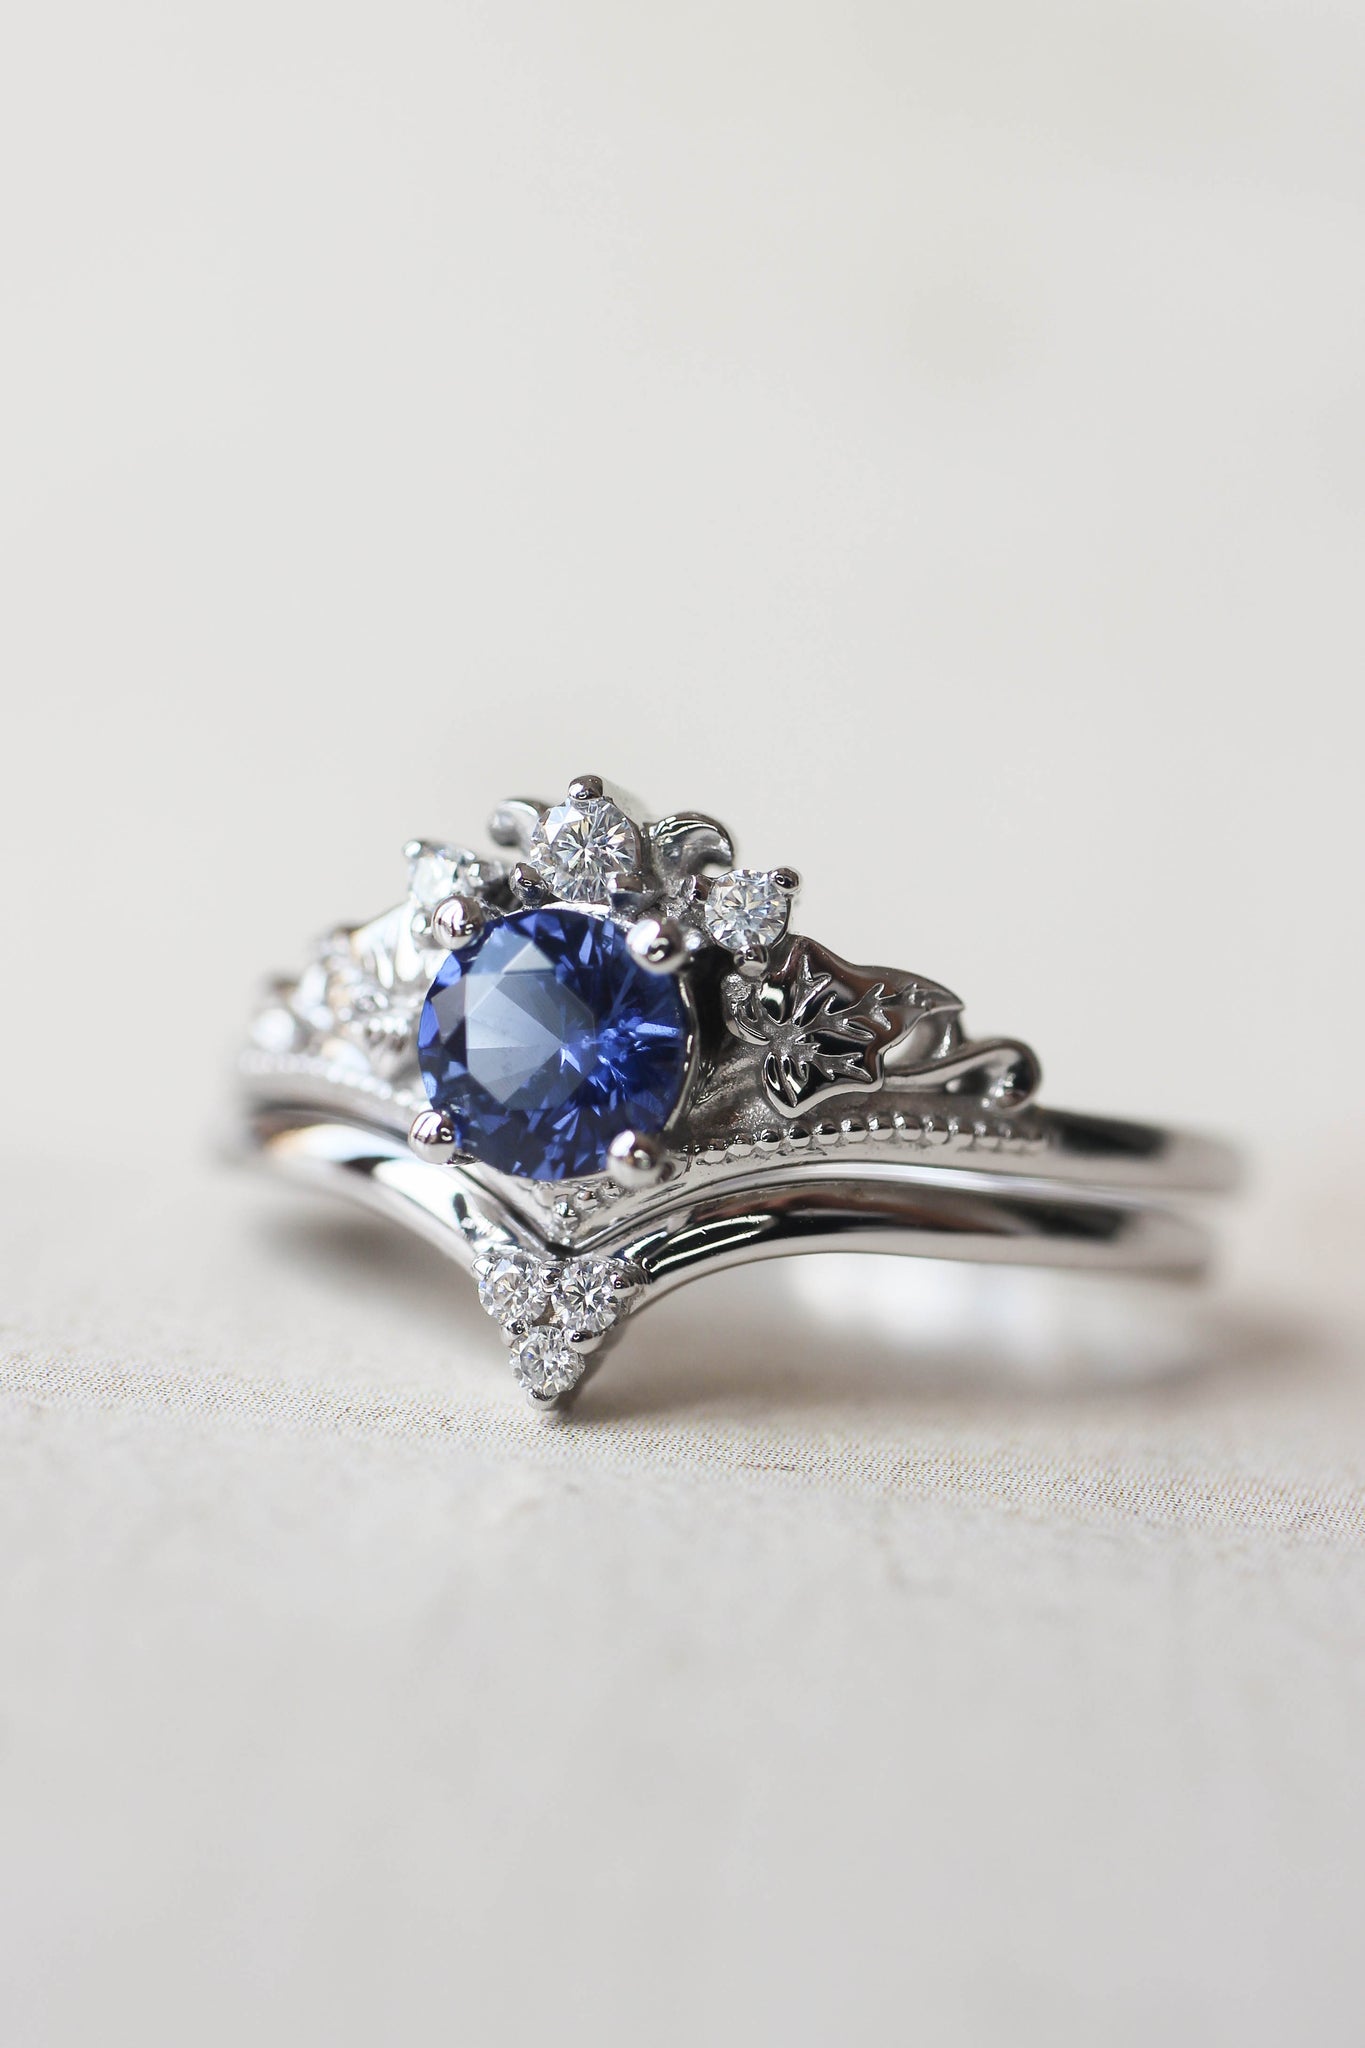 Bridal ring set with lab sapphire and diamonds / Ariadne simplified - Eden Garden Jewelry™